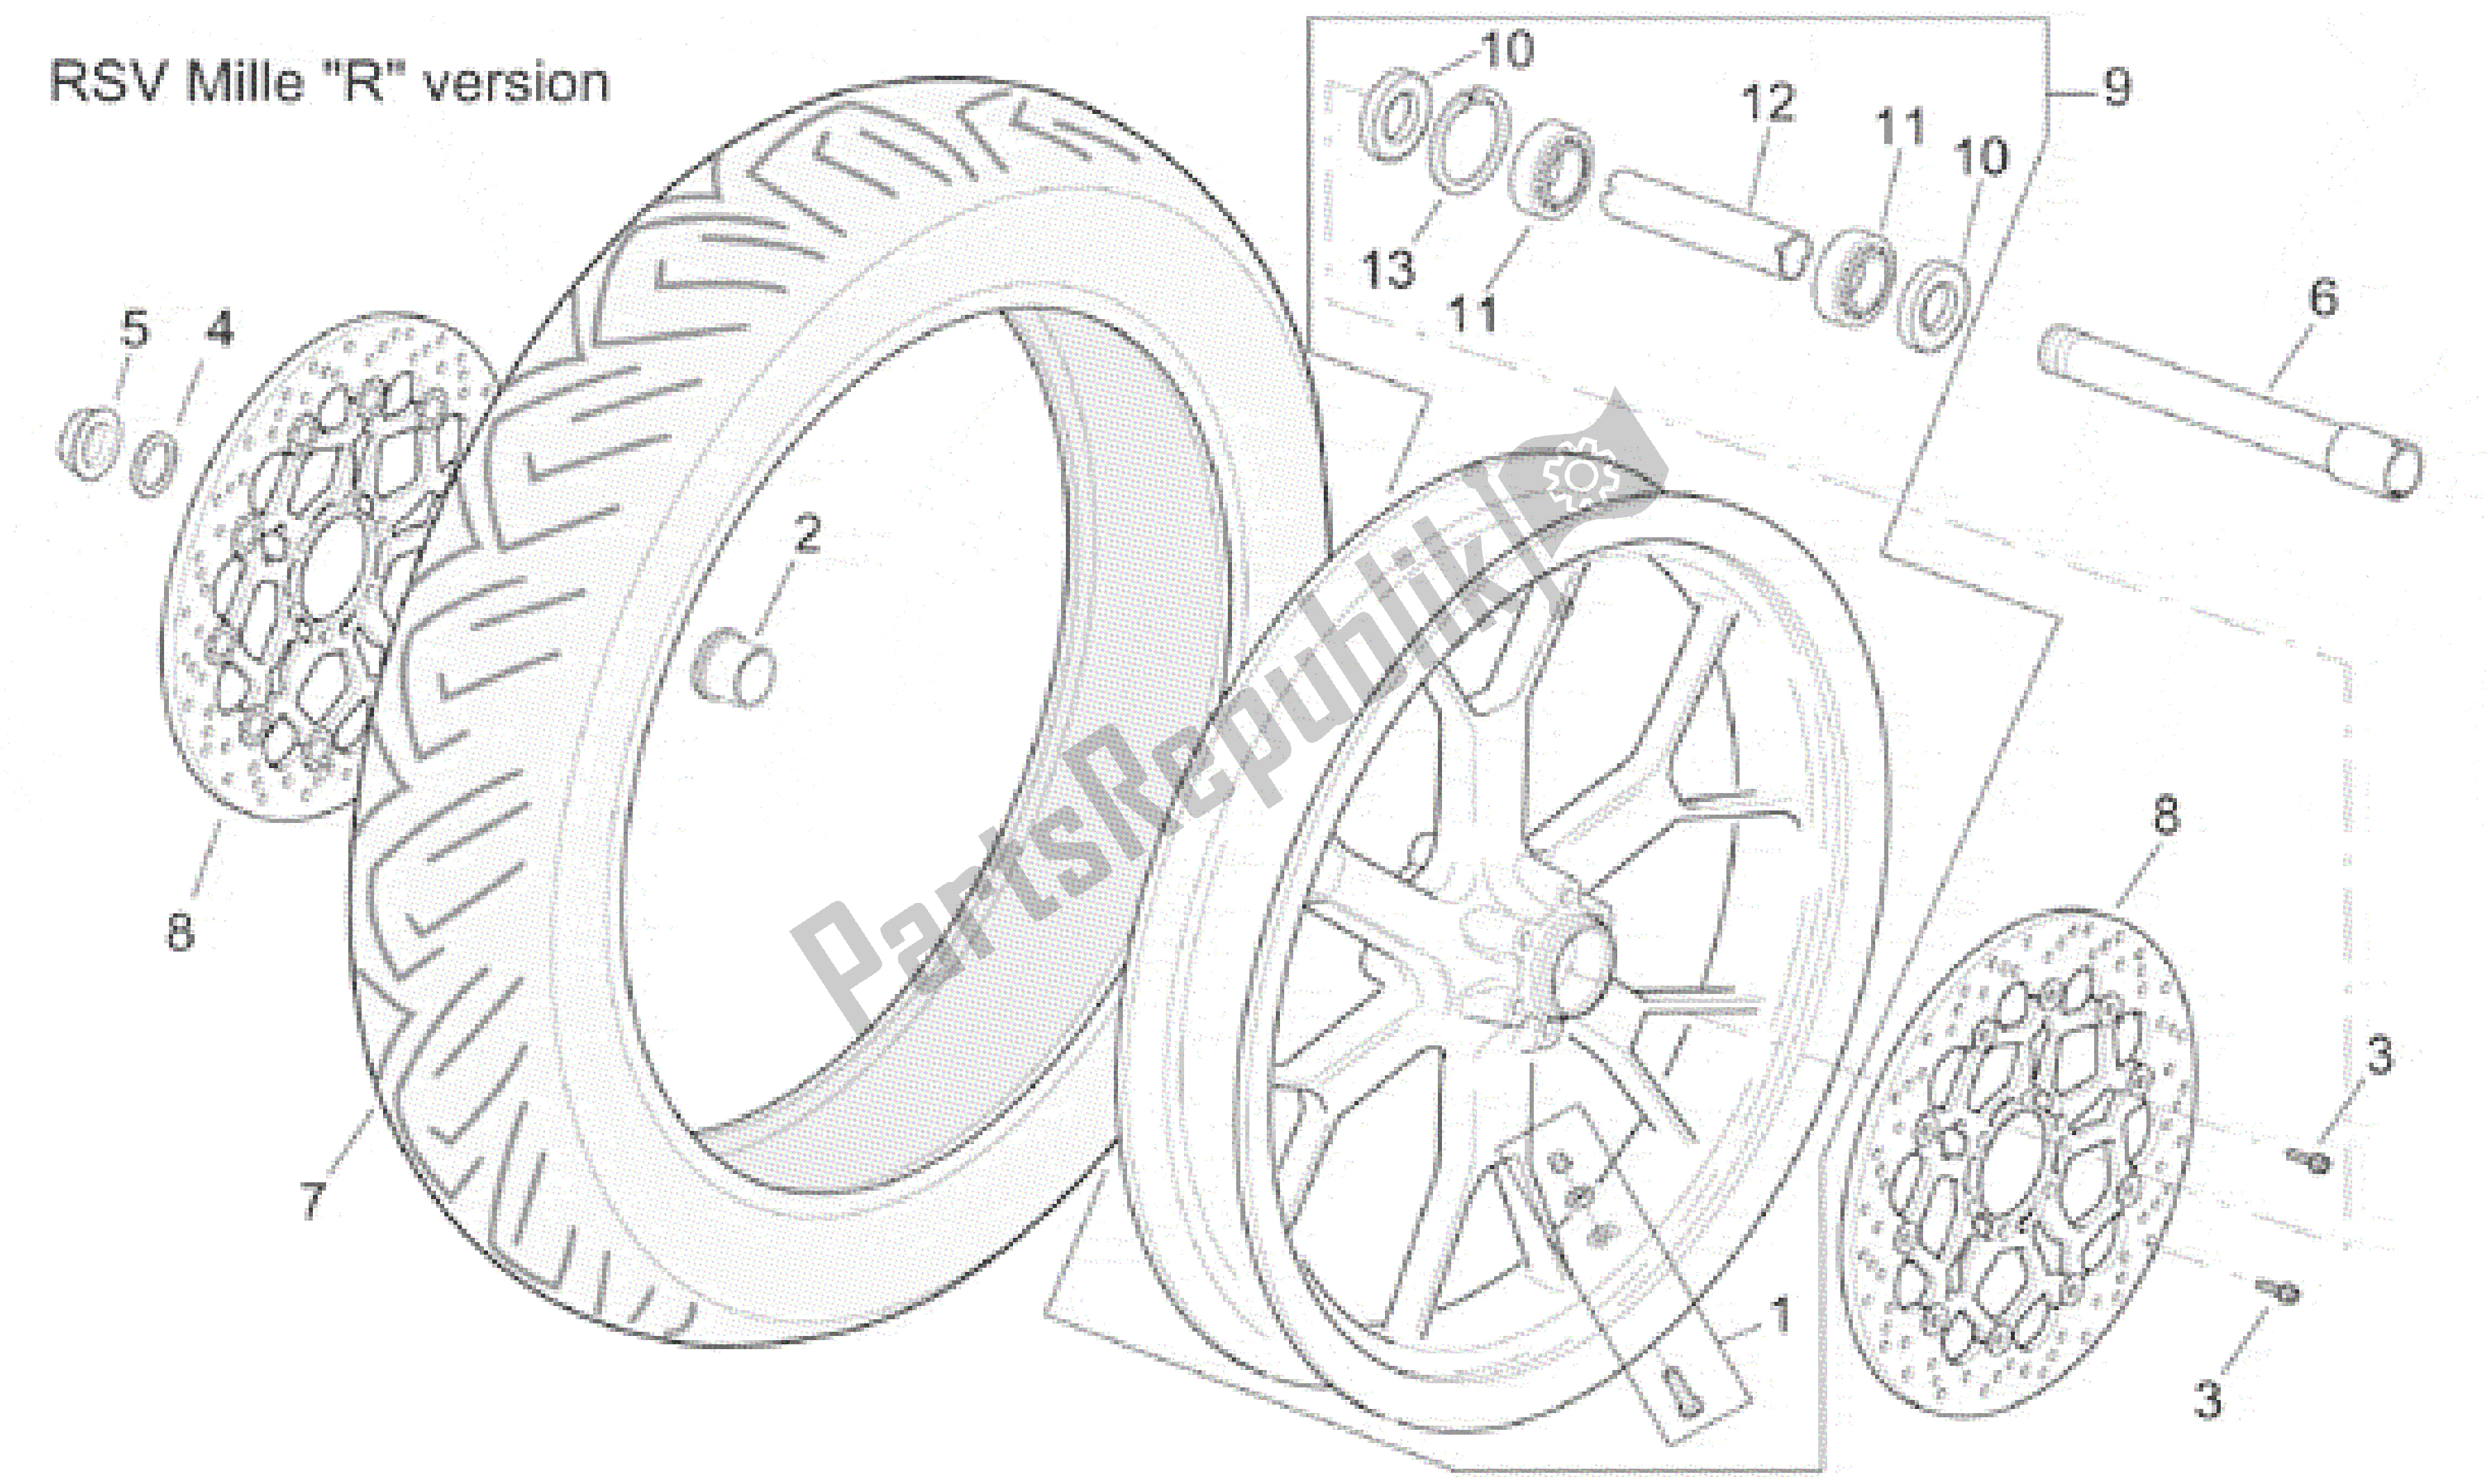 All parts for the Front Wheel Rsv Mille R Version of the Aprilia RSV Mille R 3901 1000 2001 - 2002